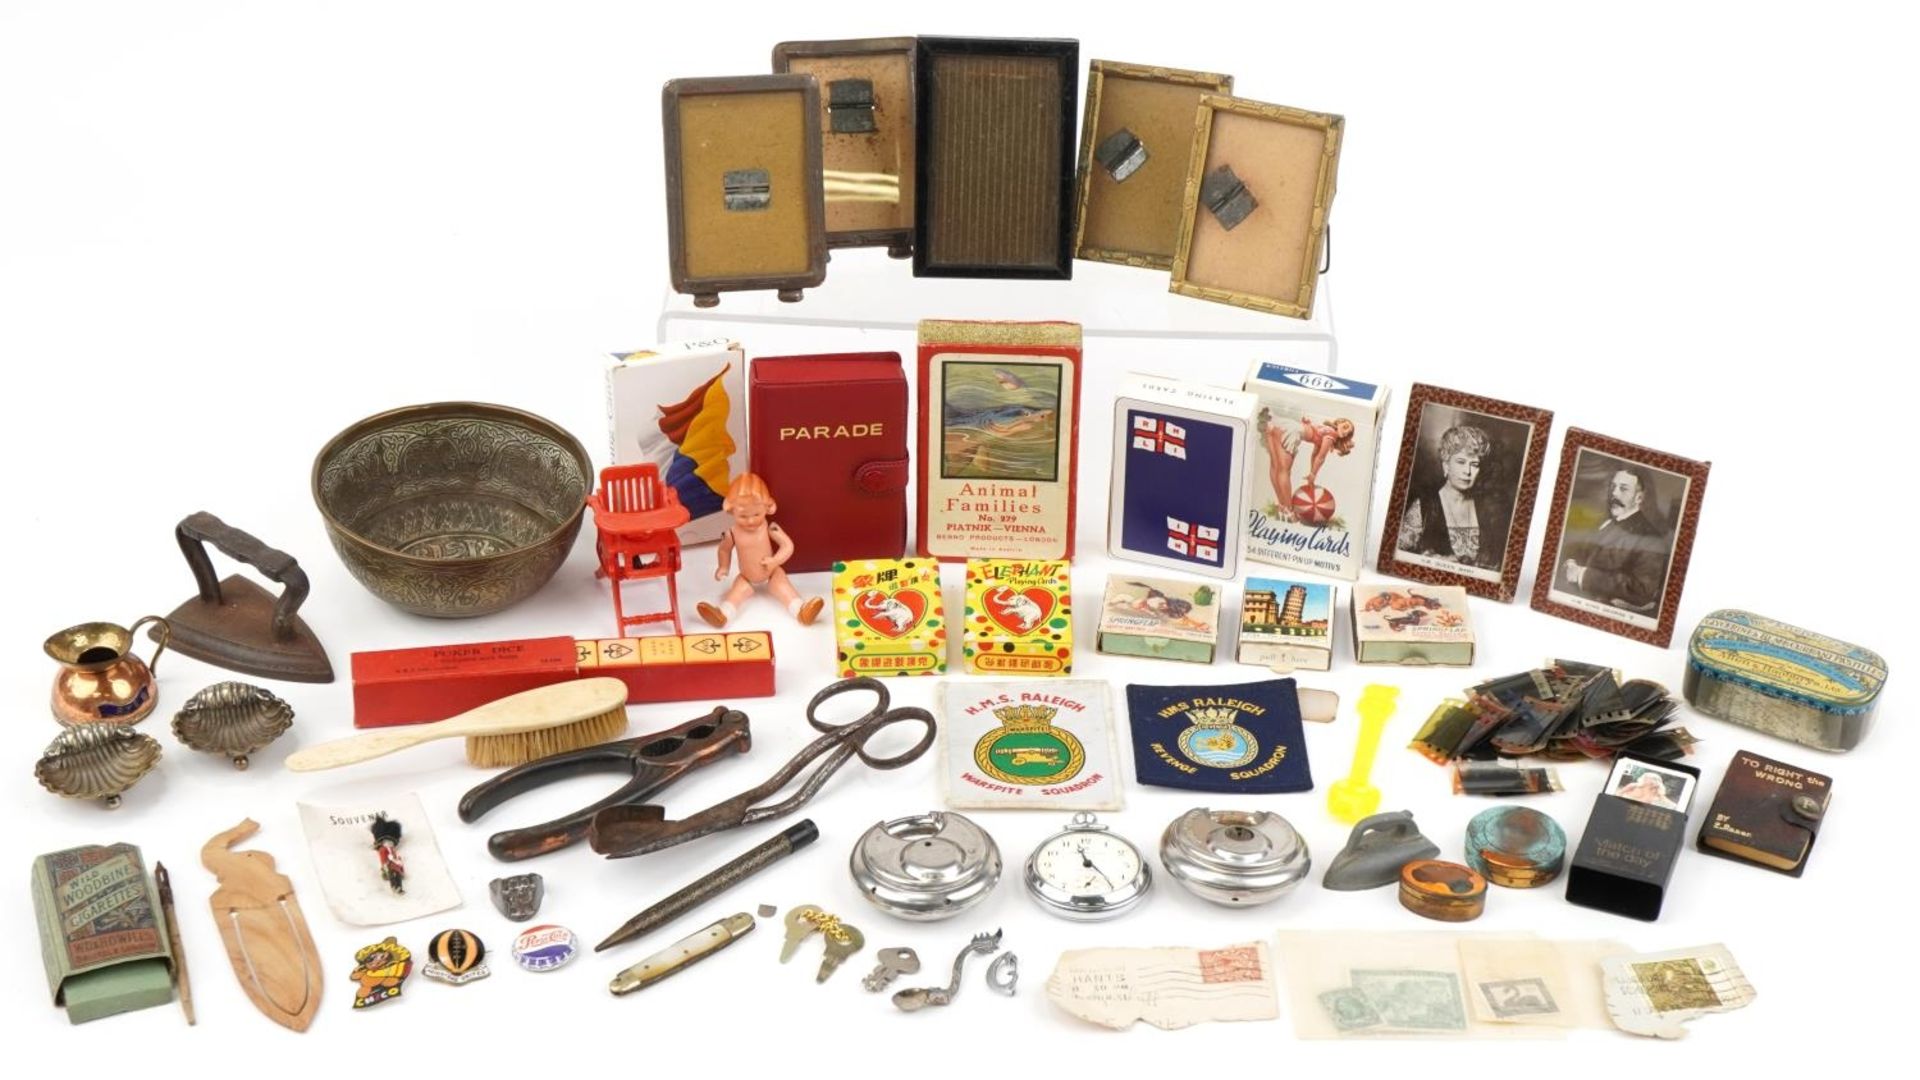 Sundry items including photo frames, playing cards, miniature German porcelain doll, padlocks and an